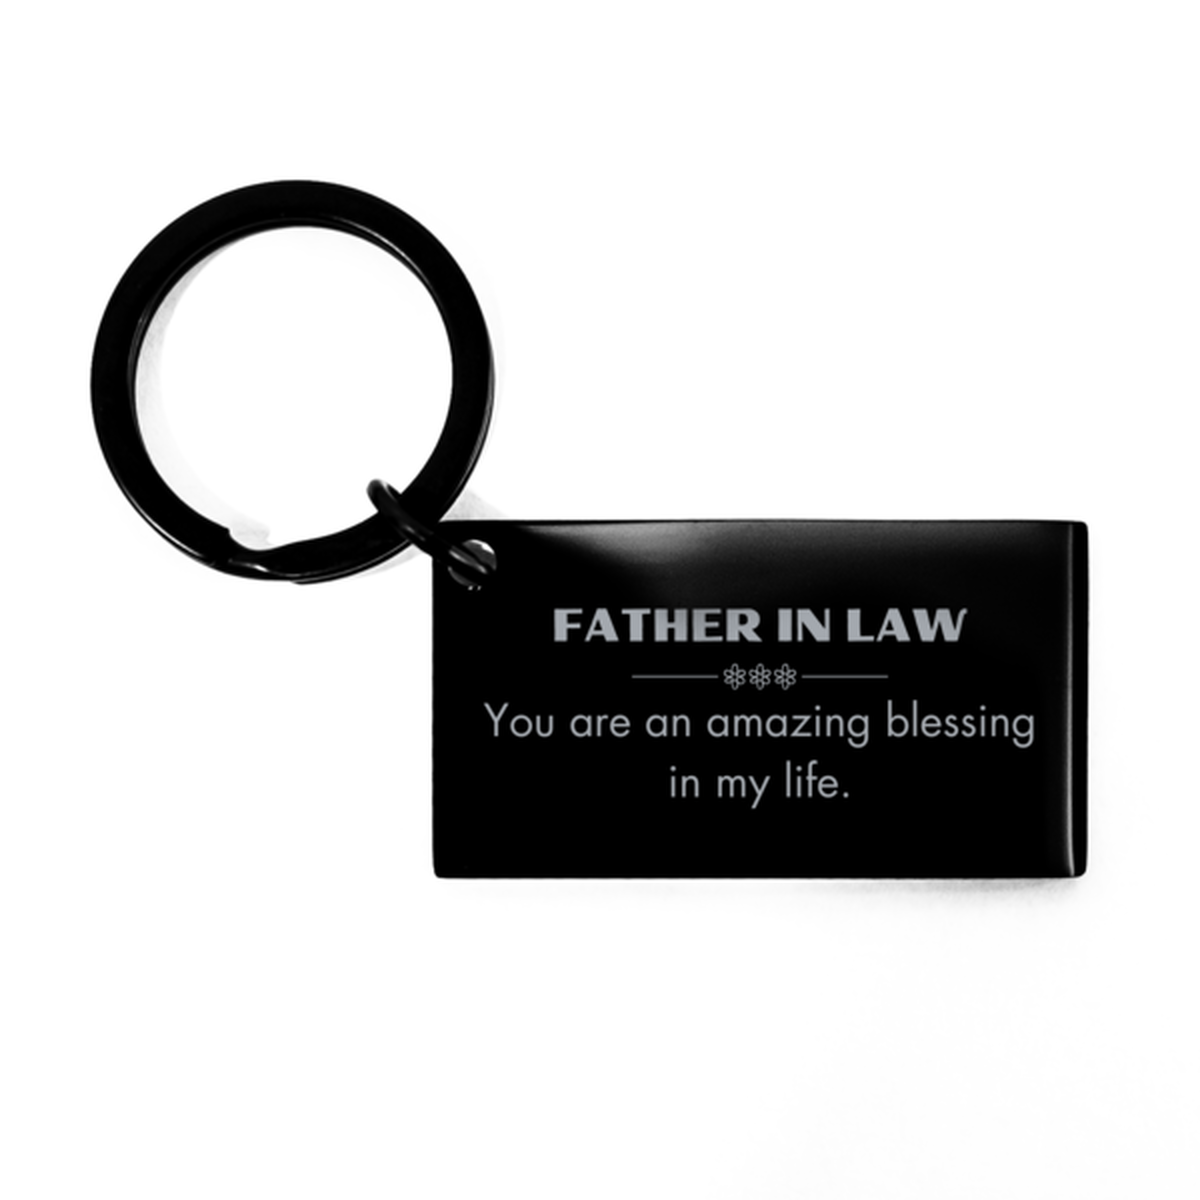 Father In Law Keychain, You are an amazing blessing in my life, Thank You Gifts For Father In Law, Inspirational Birthday Christmas Unique Gifts For Father In Law